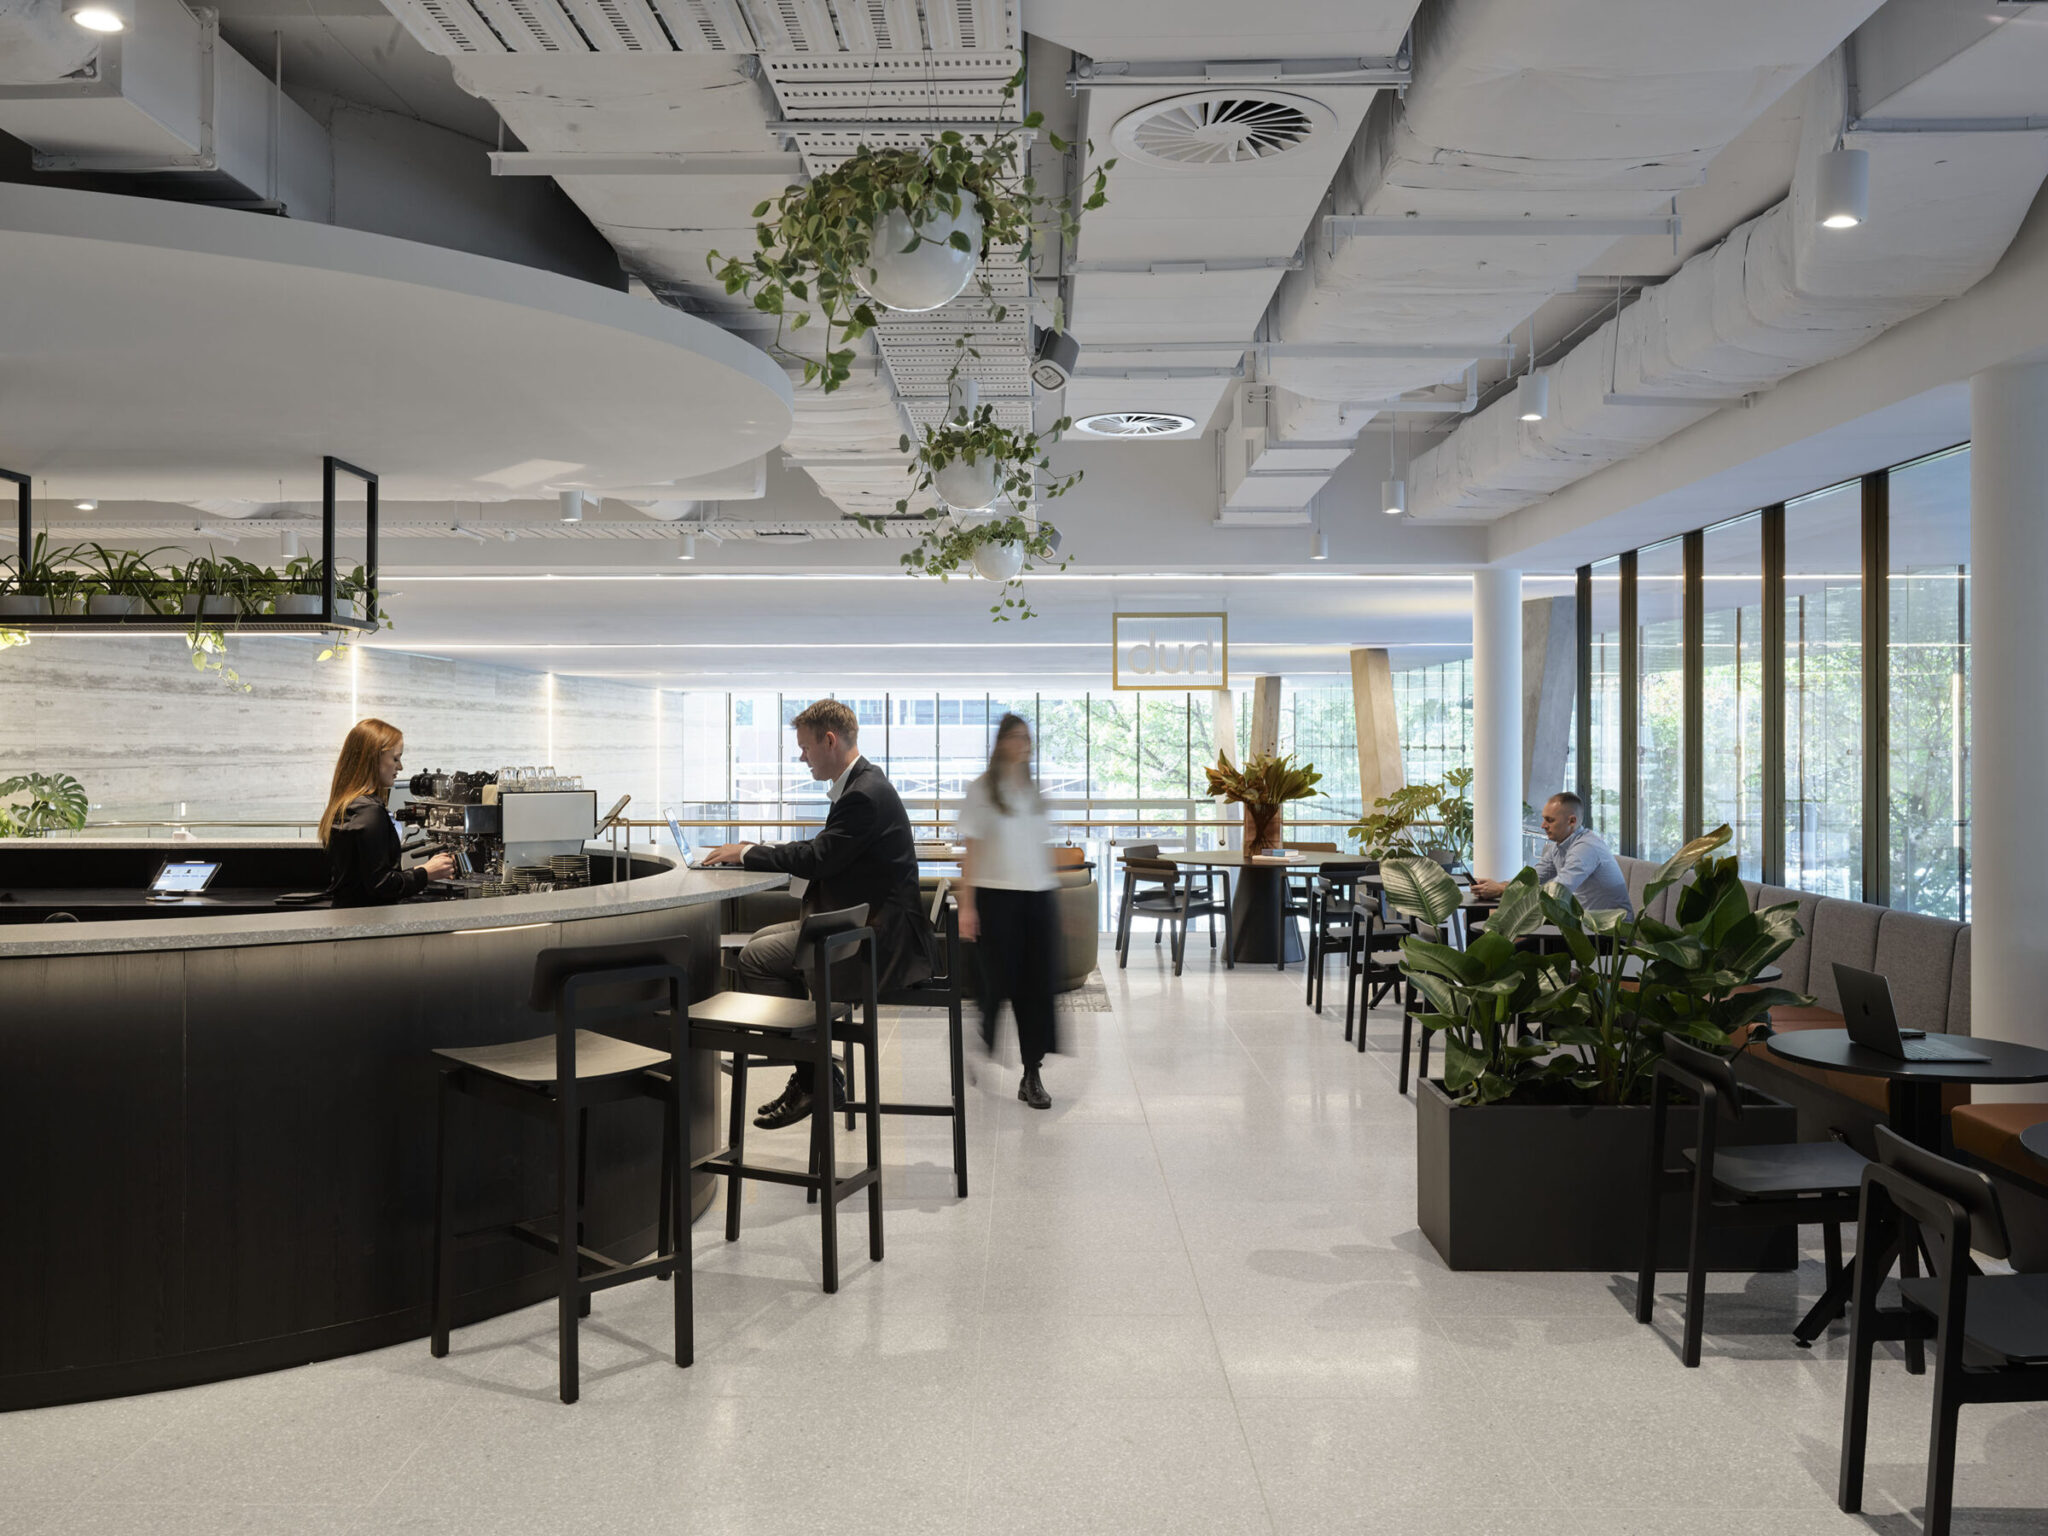  Broker Partnerships With locations across Australia offering flexible terms, purpose-built spaces, and all inclusive amenities, we can help you find your client’s ideal workspace solution. 